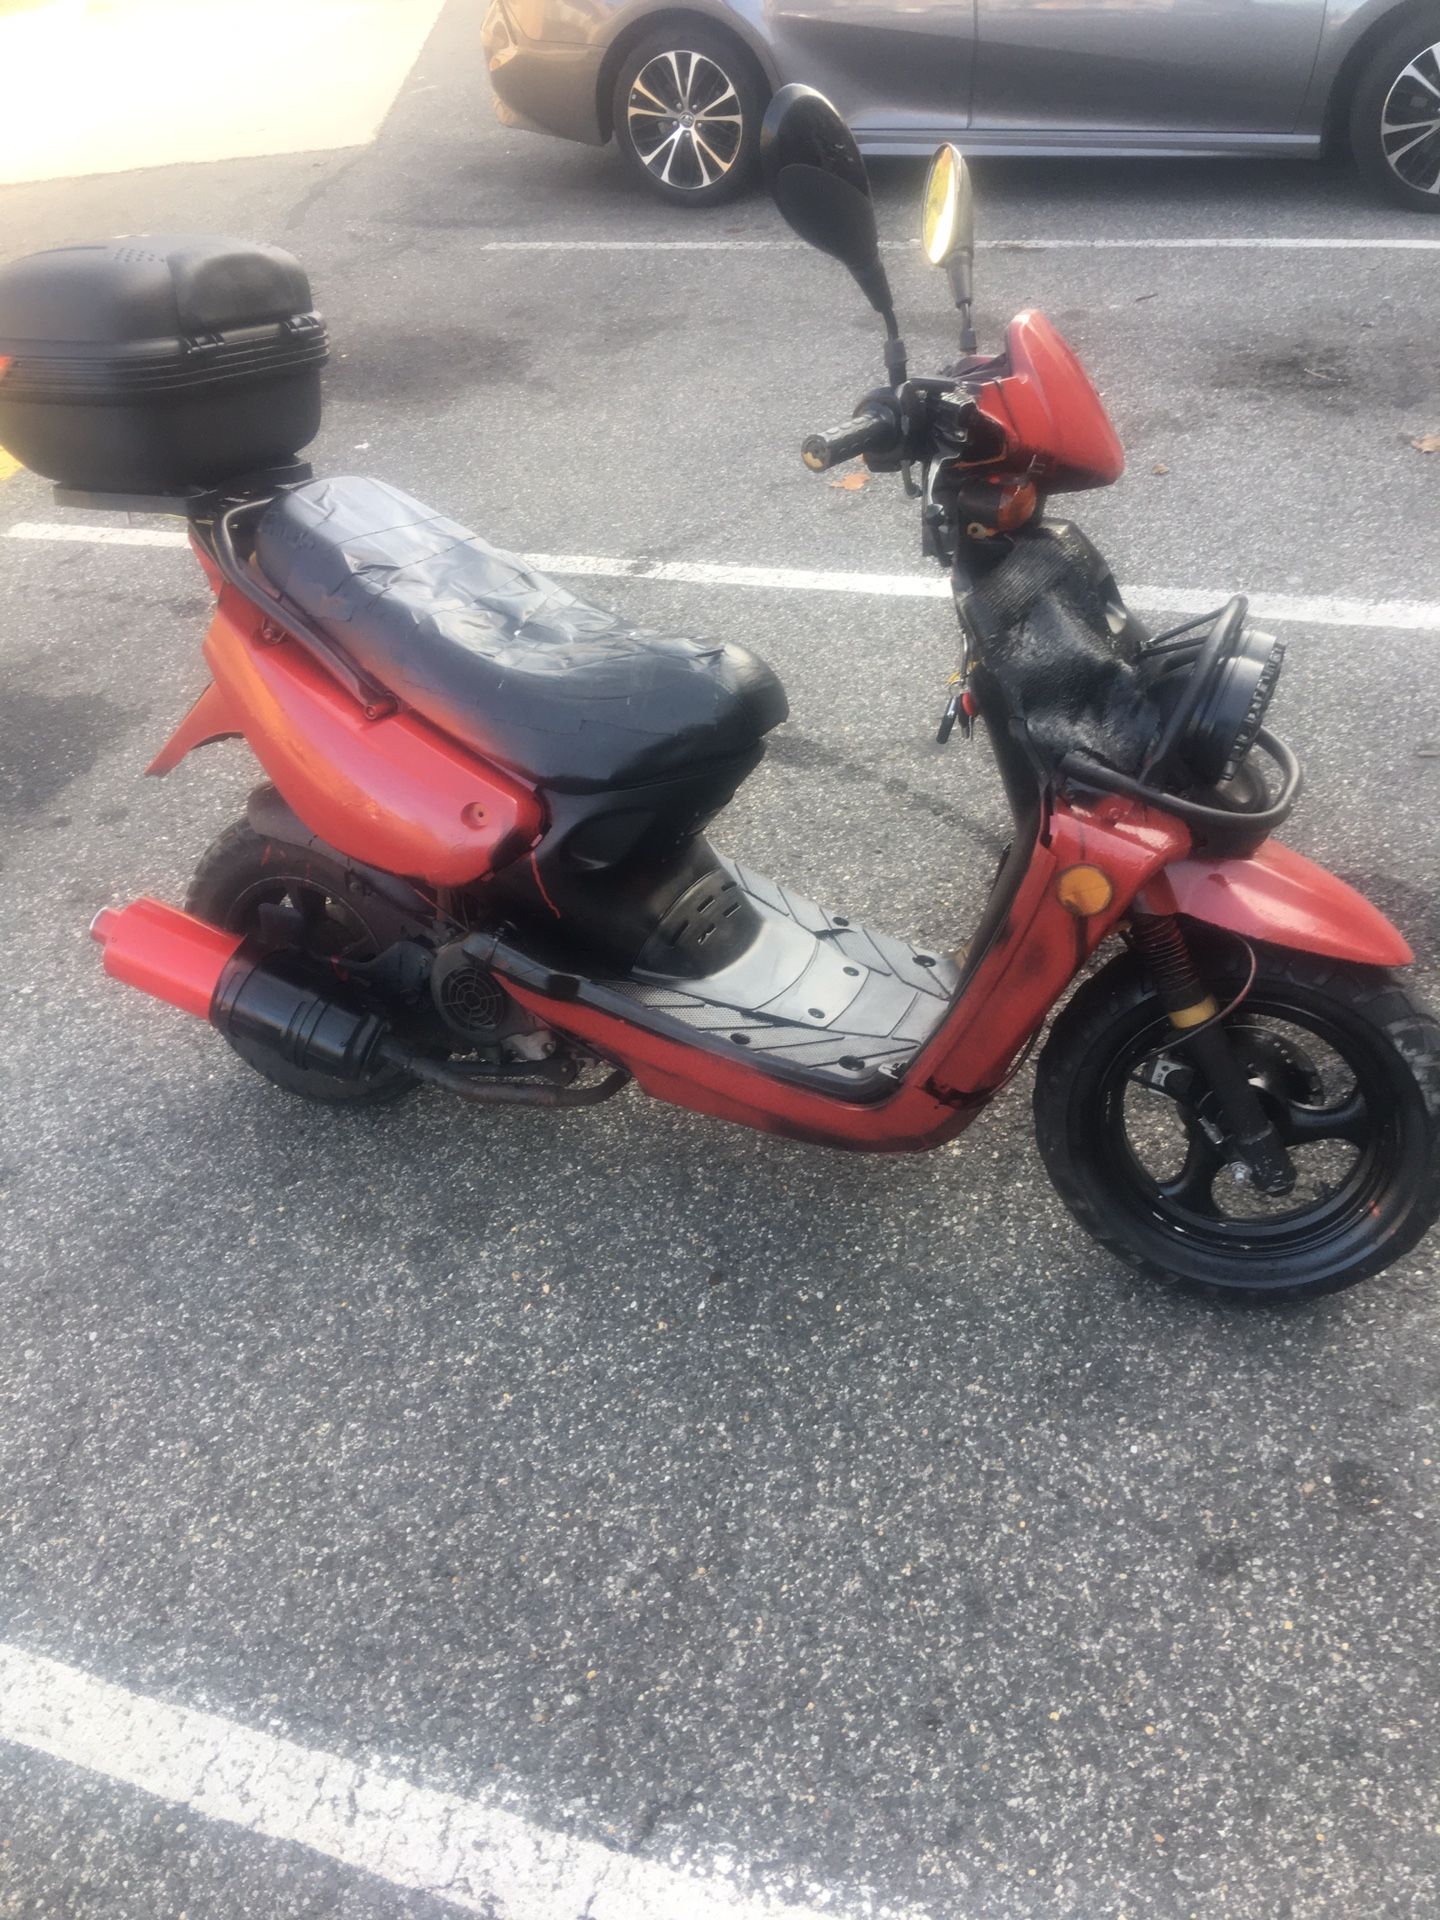 Taotao BWS 50cc Gas Moped/Scooter With Extras And Modifications